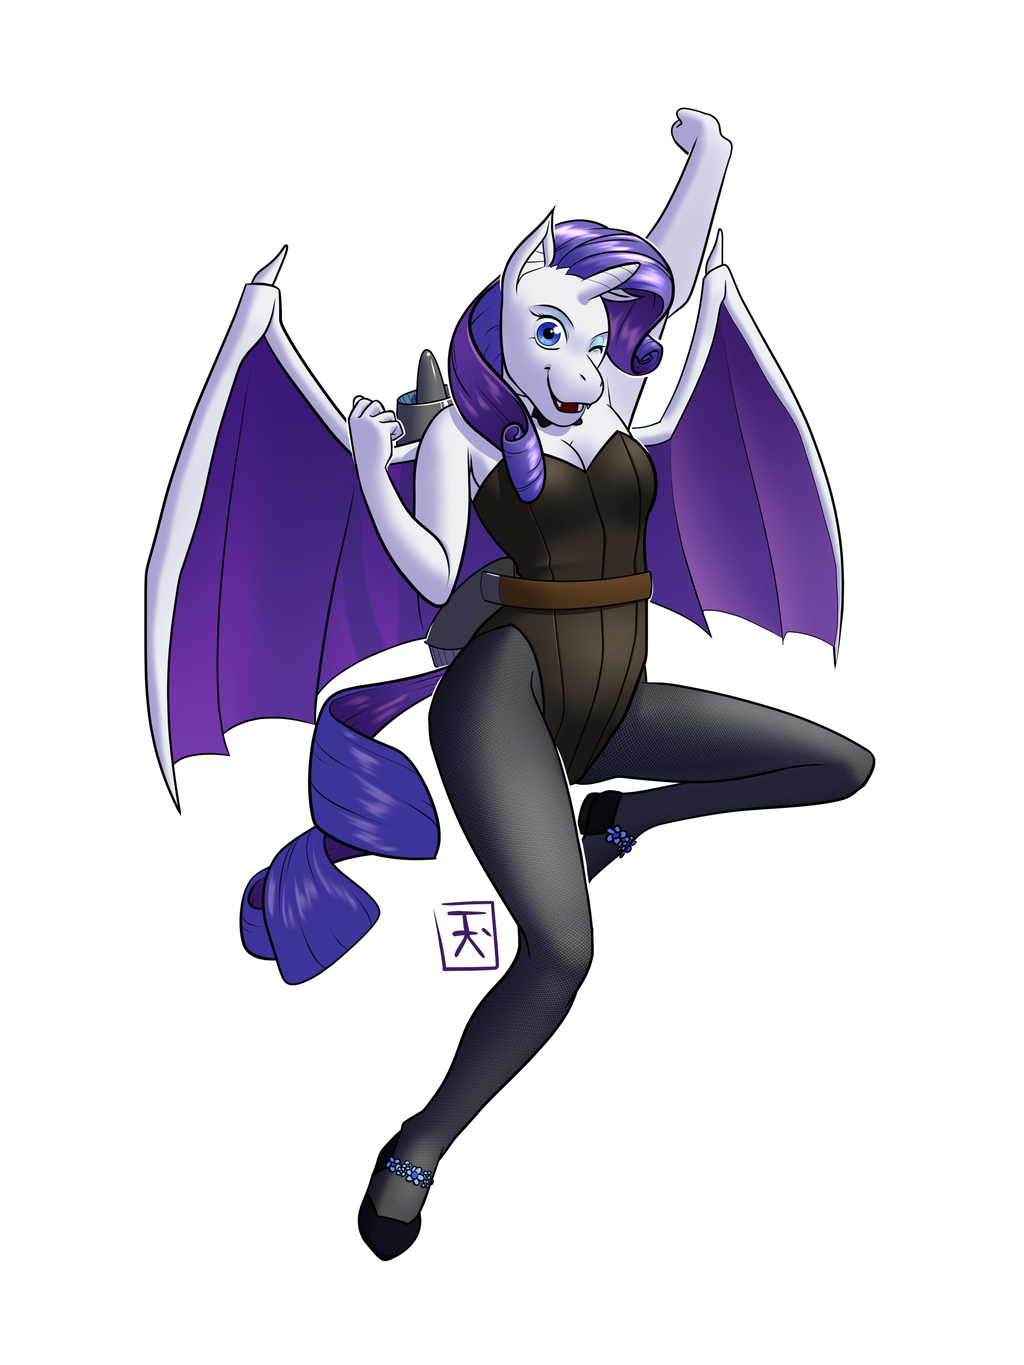 Most recent image: Request - Rarity flying high